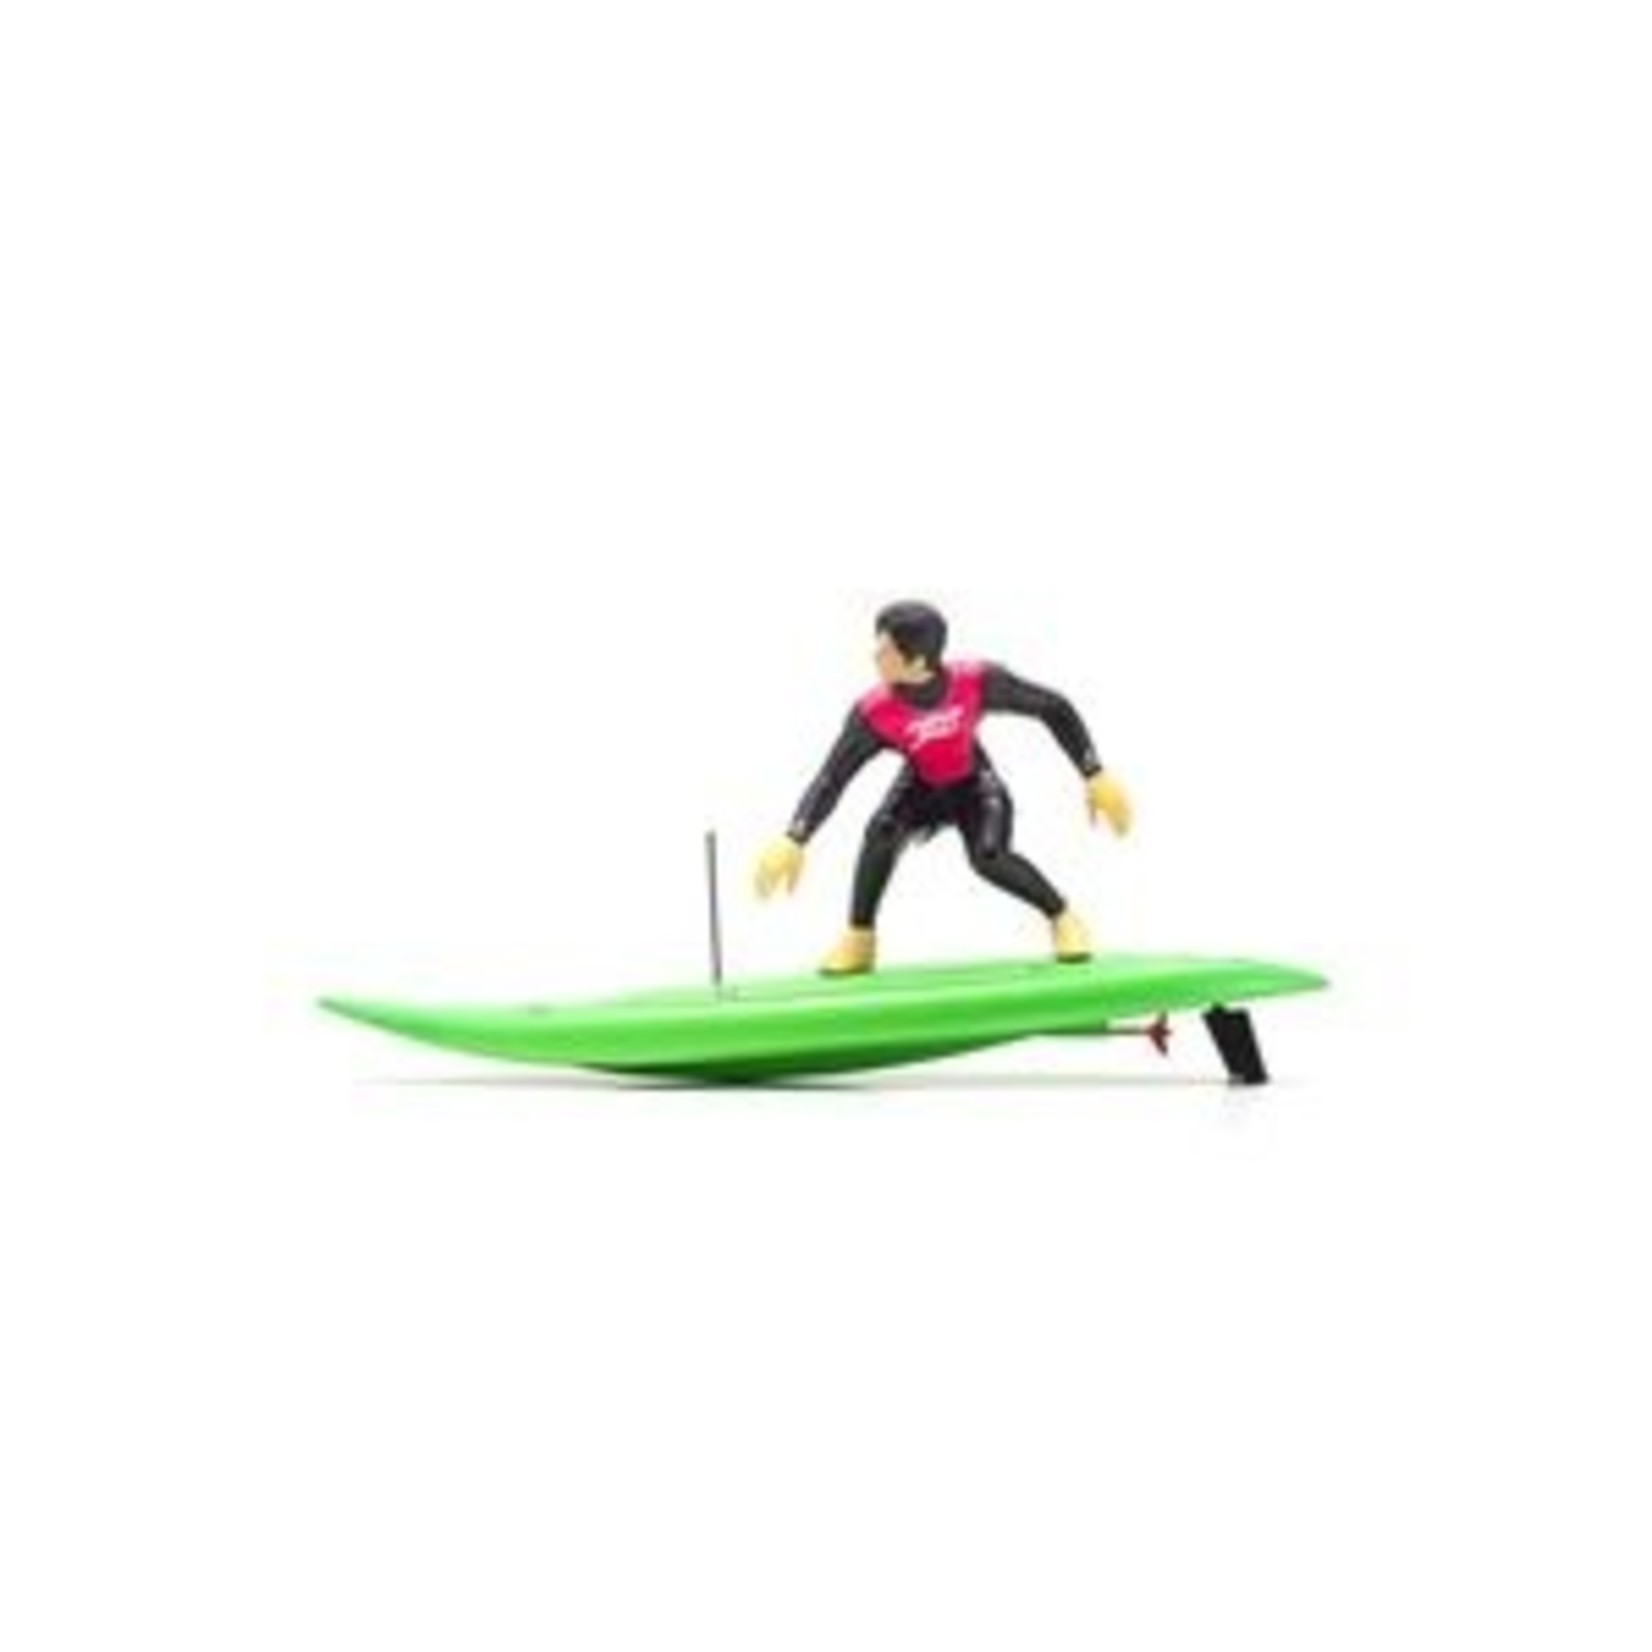 Kyosho KYO40110T3  RC Surfer 4 , Catch Surf, Readyset KT-231P+